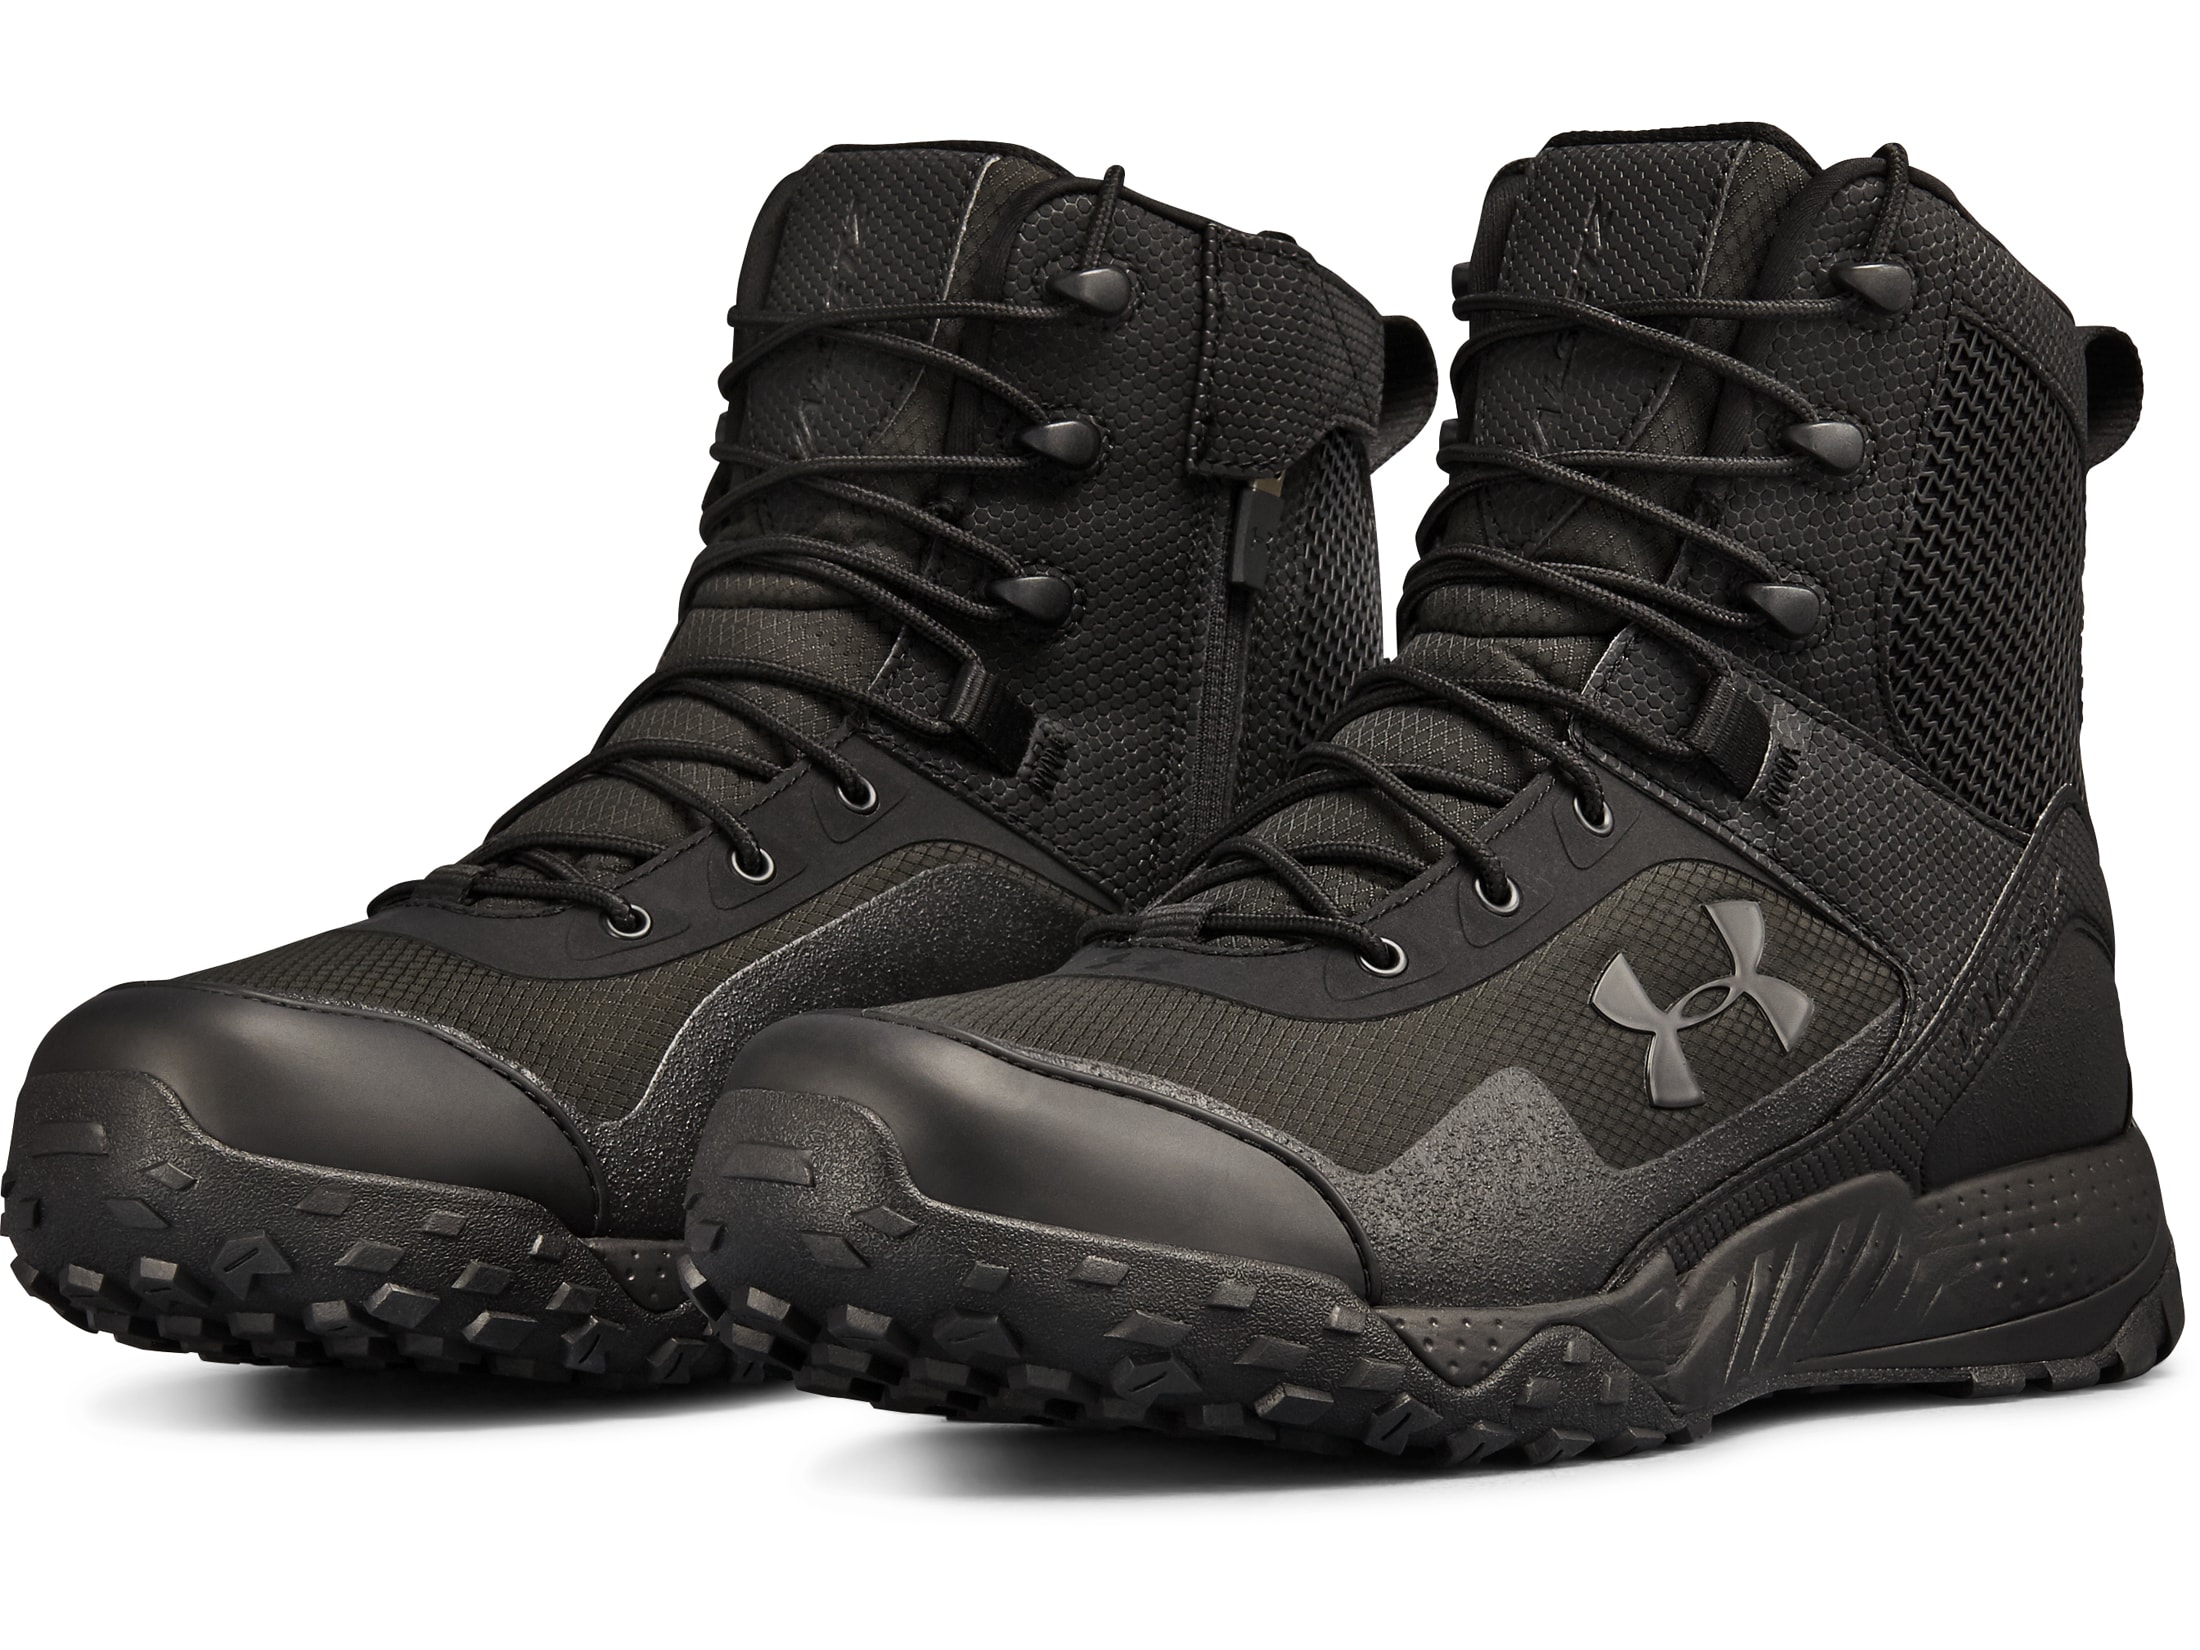 Under Armour UA Valsetz RTS 1.5 Side-Zip 7 Tactical Boots Synthetic